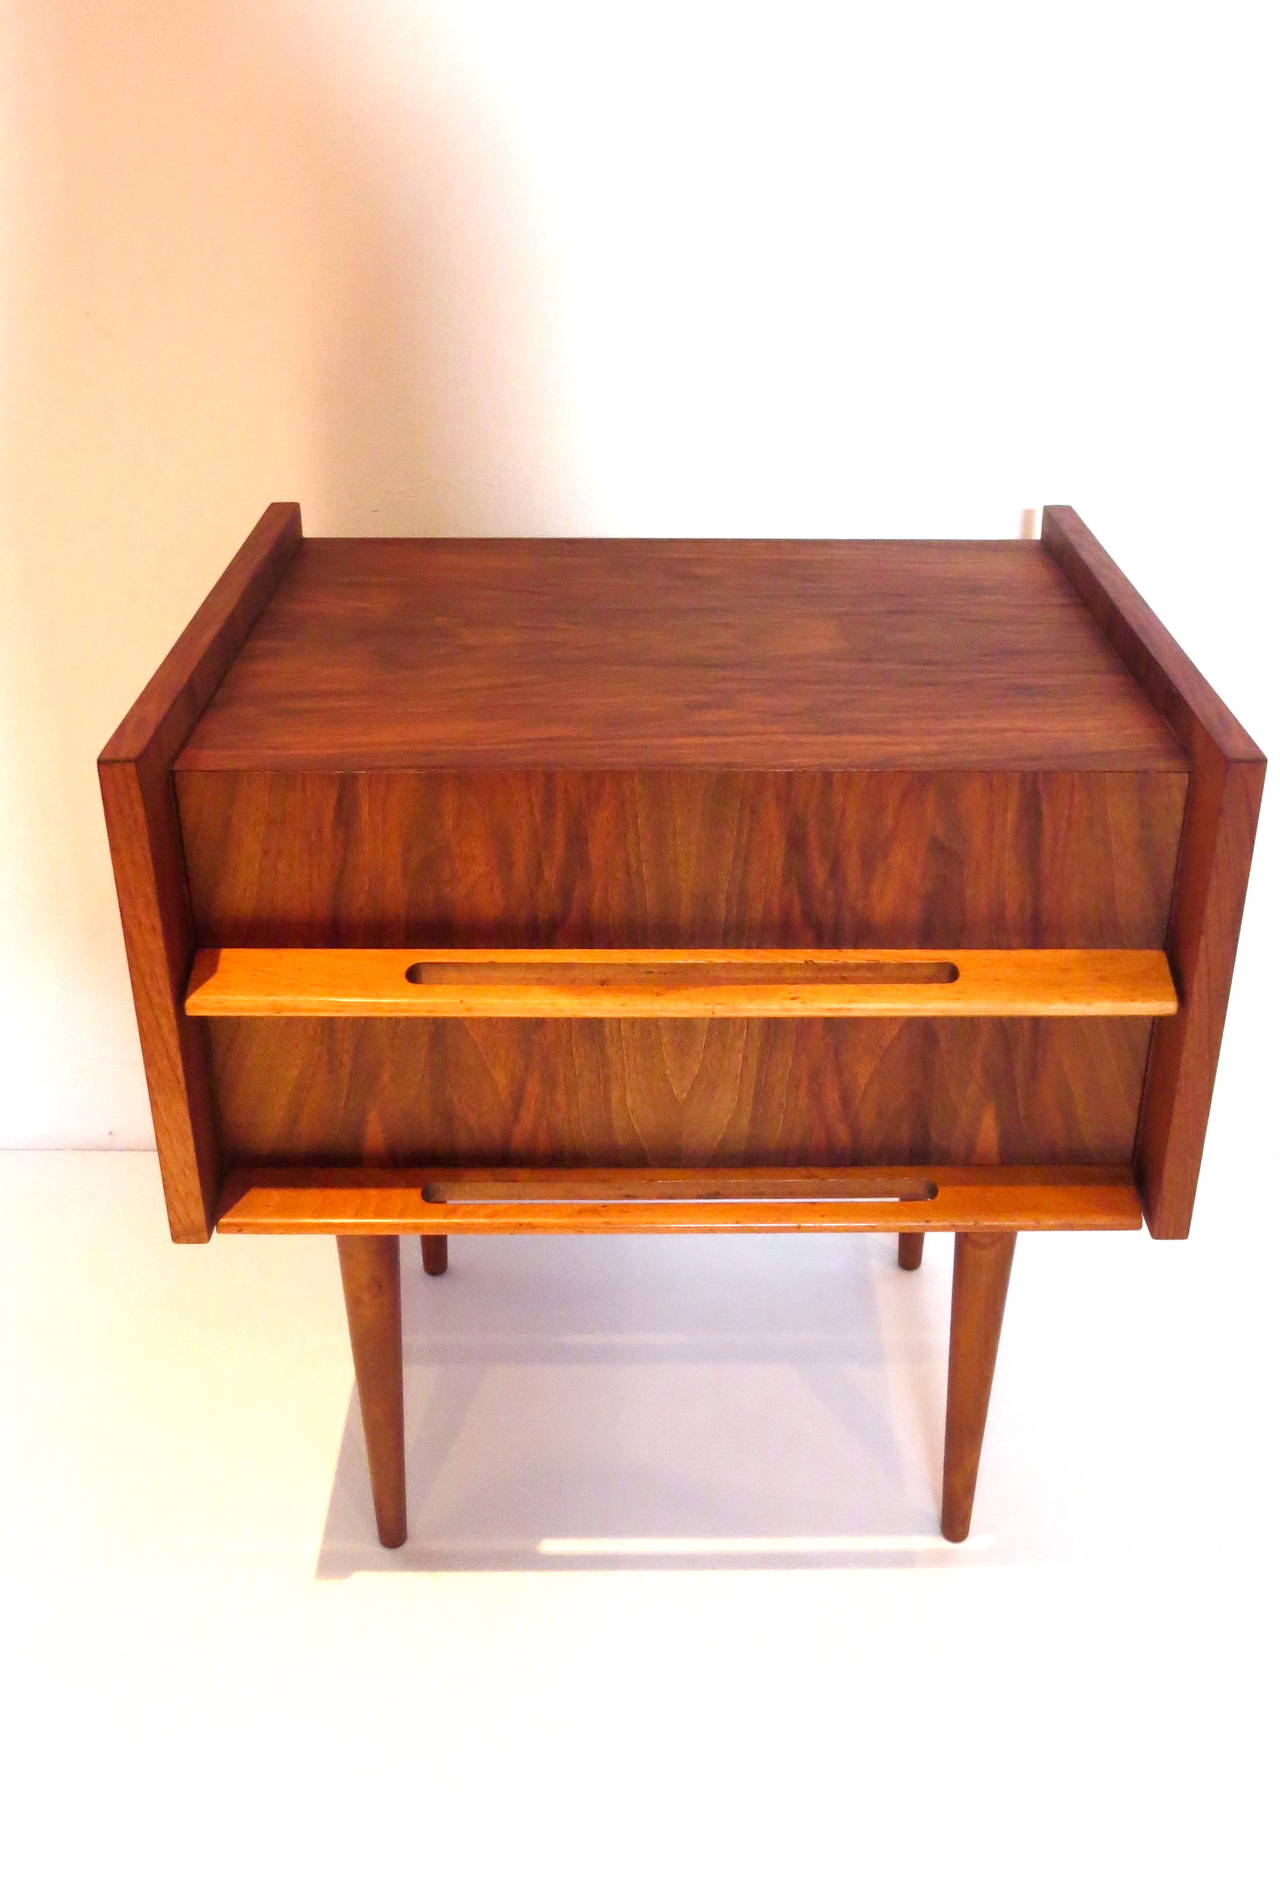 One of a kind single nightstand designed by Edmond Spence, circa 1950s, in walnut oiled finish with solid birch handles, rare finish all in good condition with a couple of marks on the left lower side as shown on the picture nothing major but needs